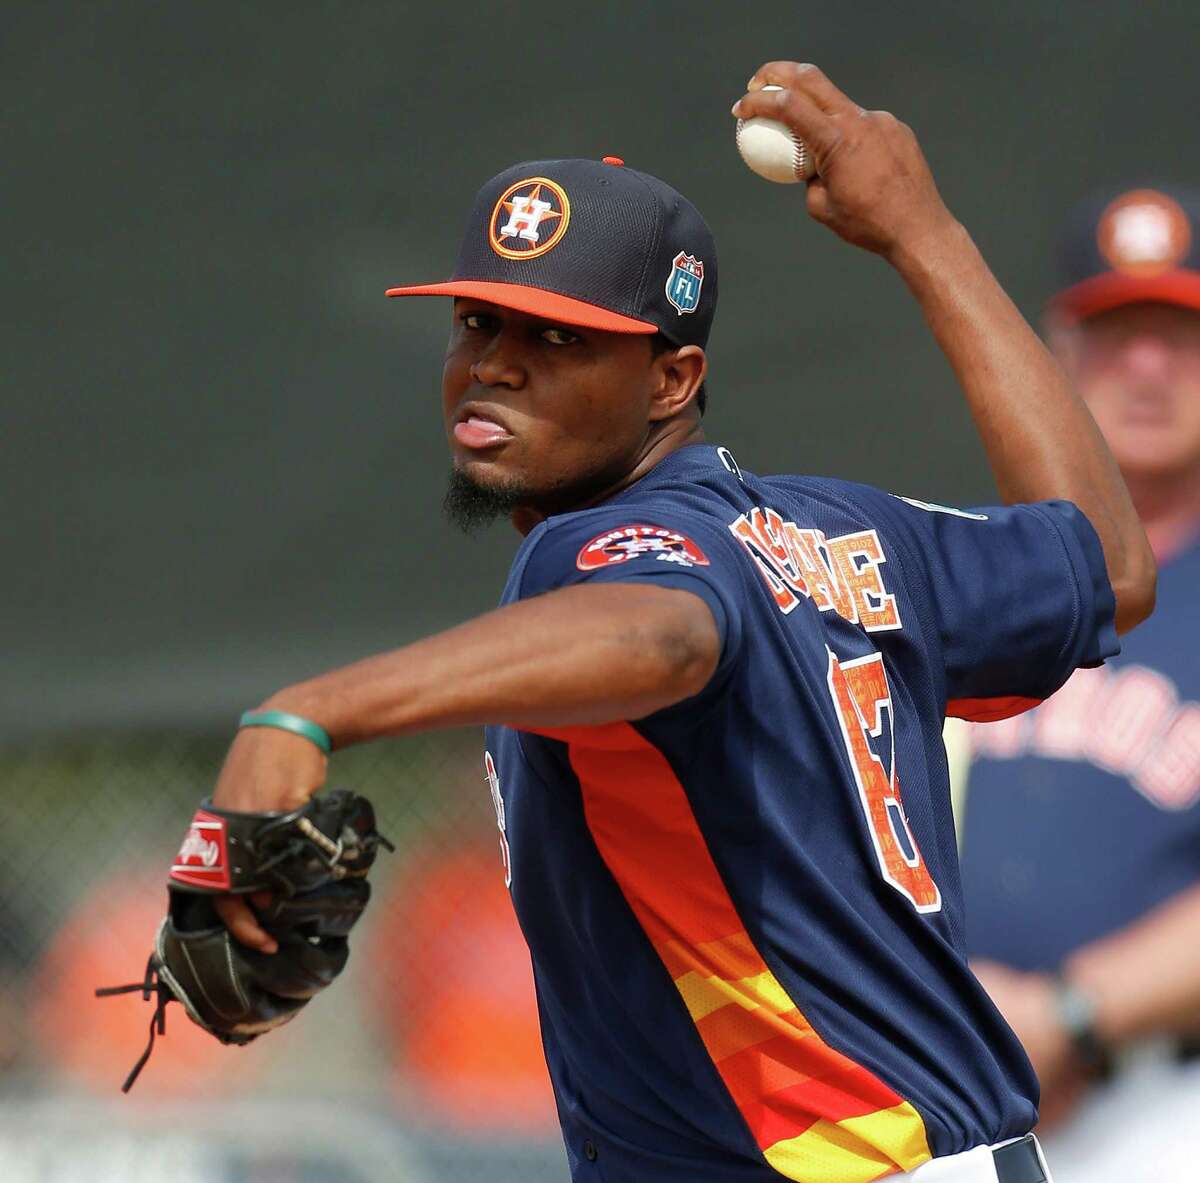 Boasting a 99 mph fastball, pitcher Jandel Gustave has what Astros manager A.J. Hinch calls "wipeout capabilities." The 23-year-old righthander is coming off his best pro season, having gone 5-2 with a 2.15 ERA and 20 saves for Class AA Corpus Christi.